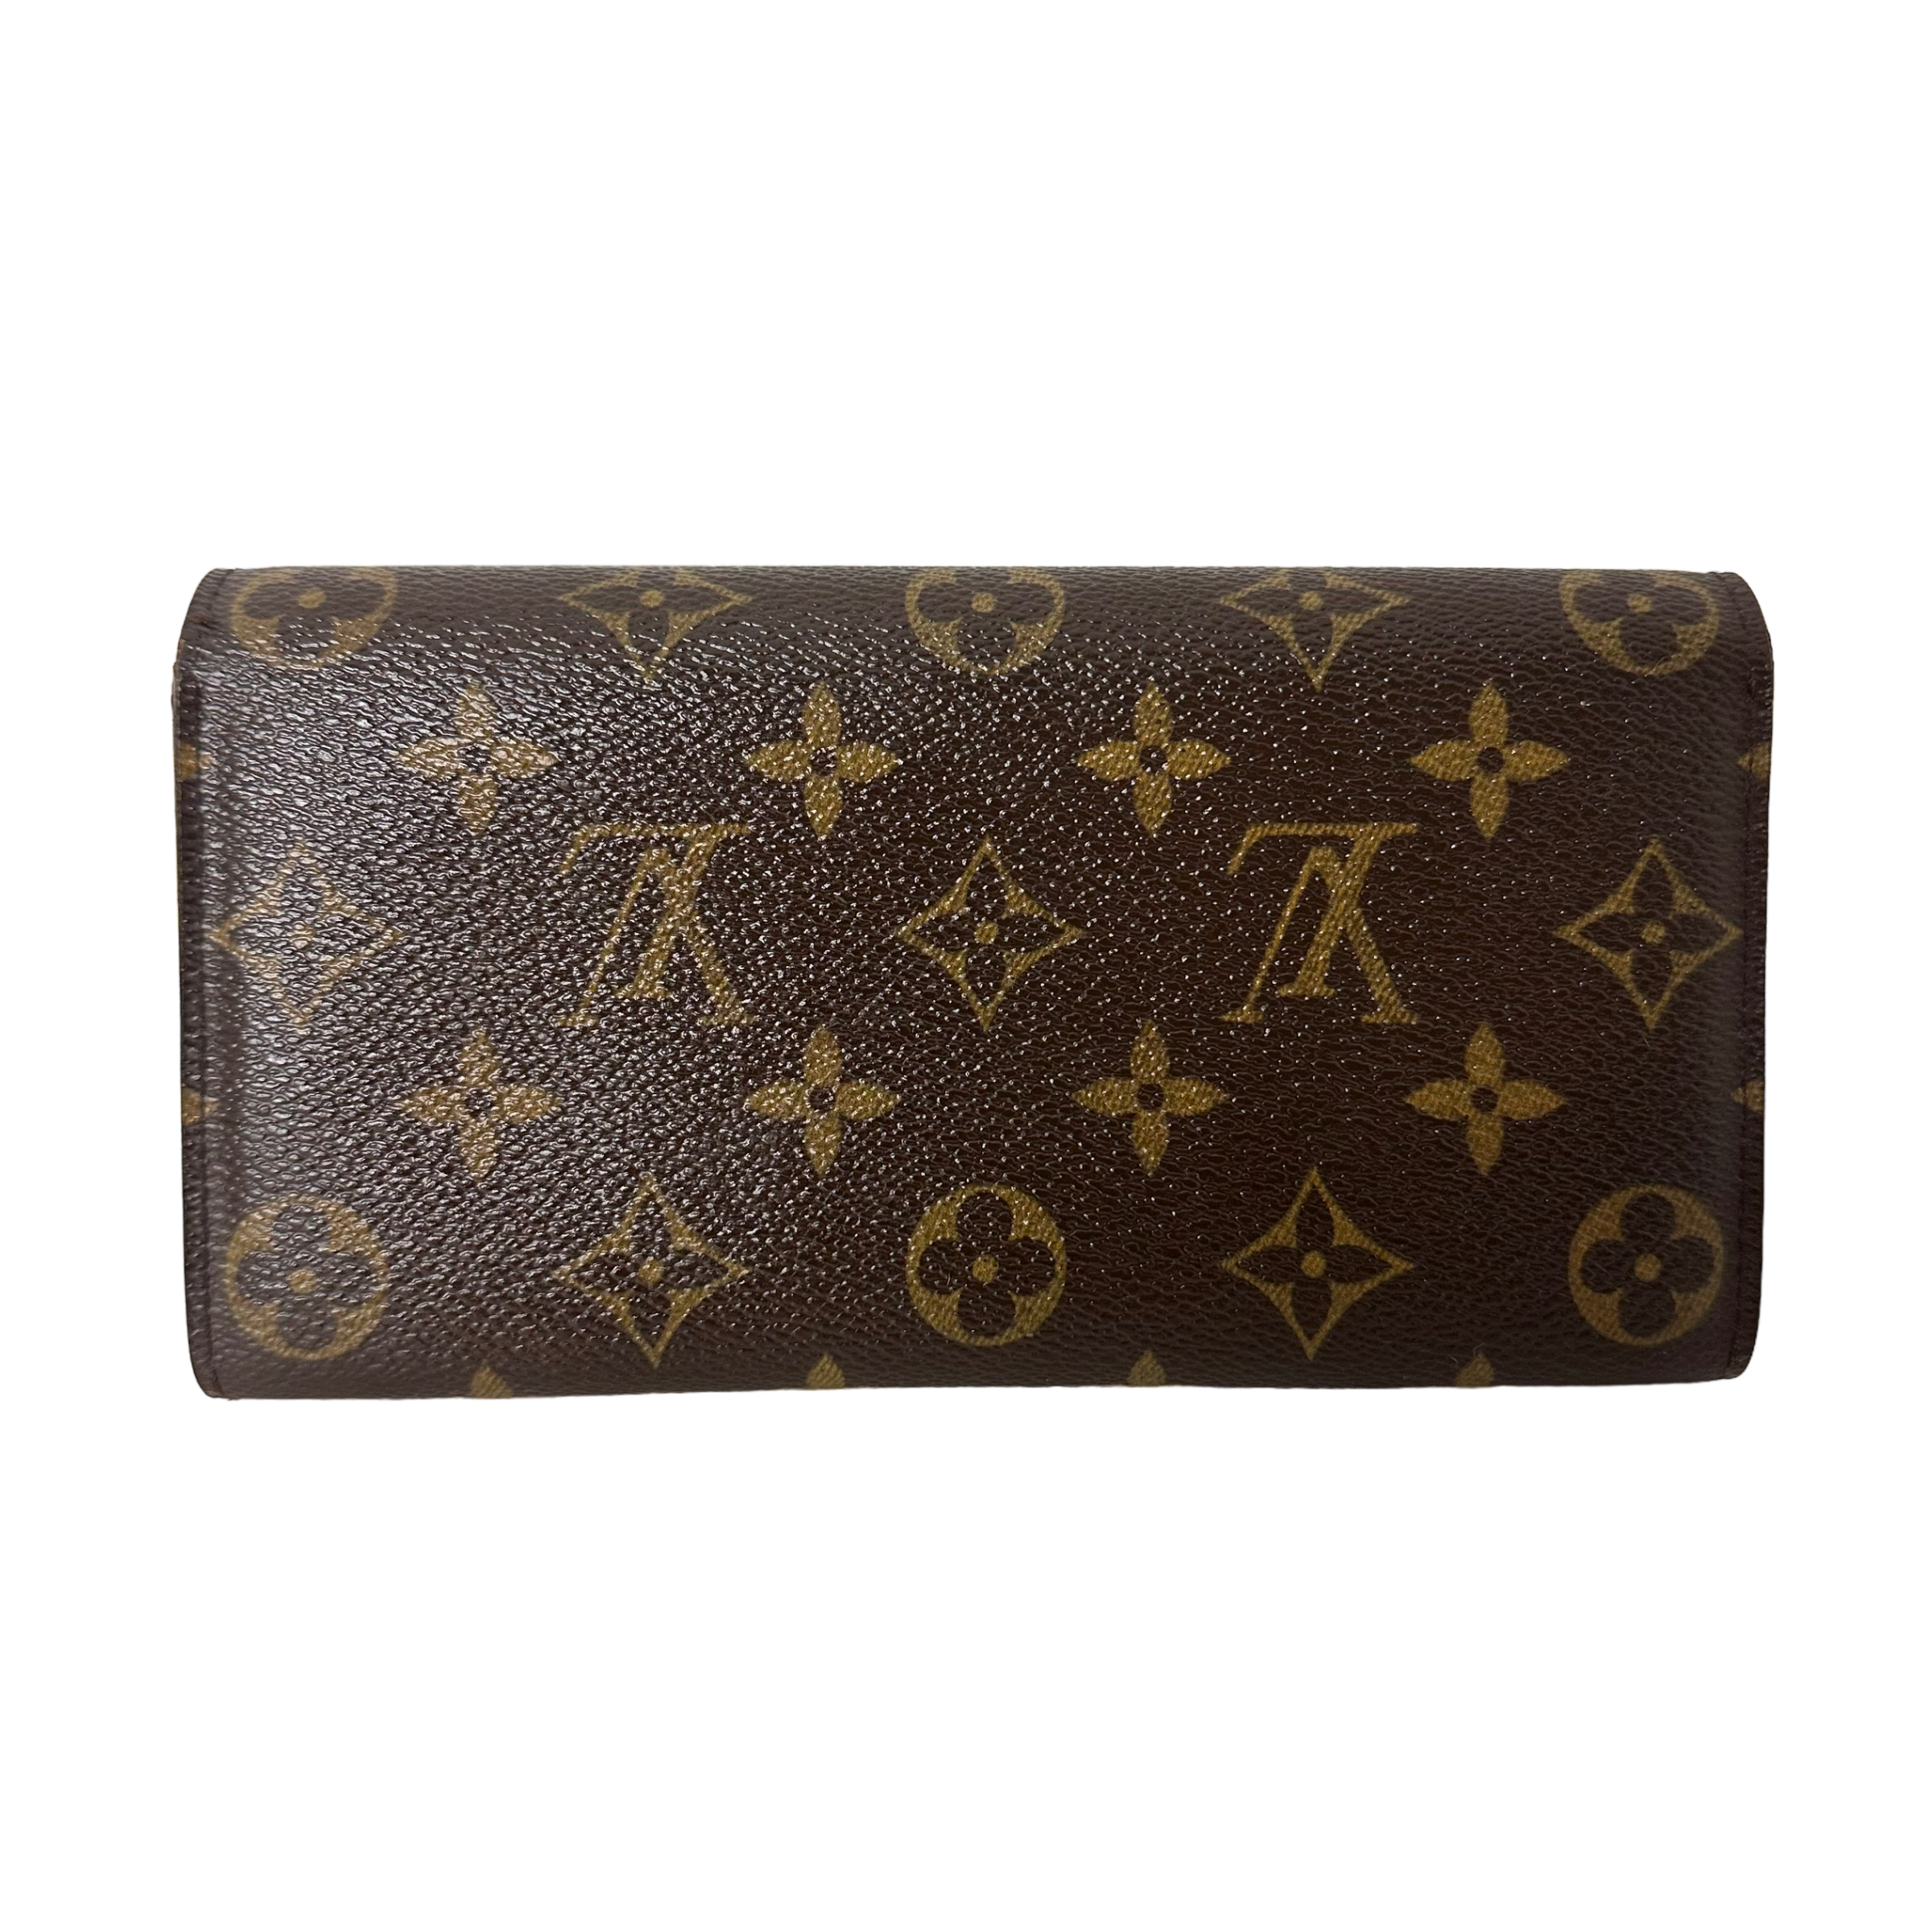 Sarah Wallet with Gold Chain